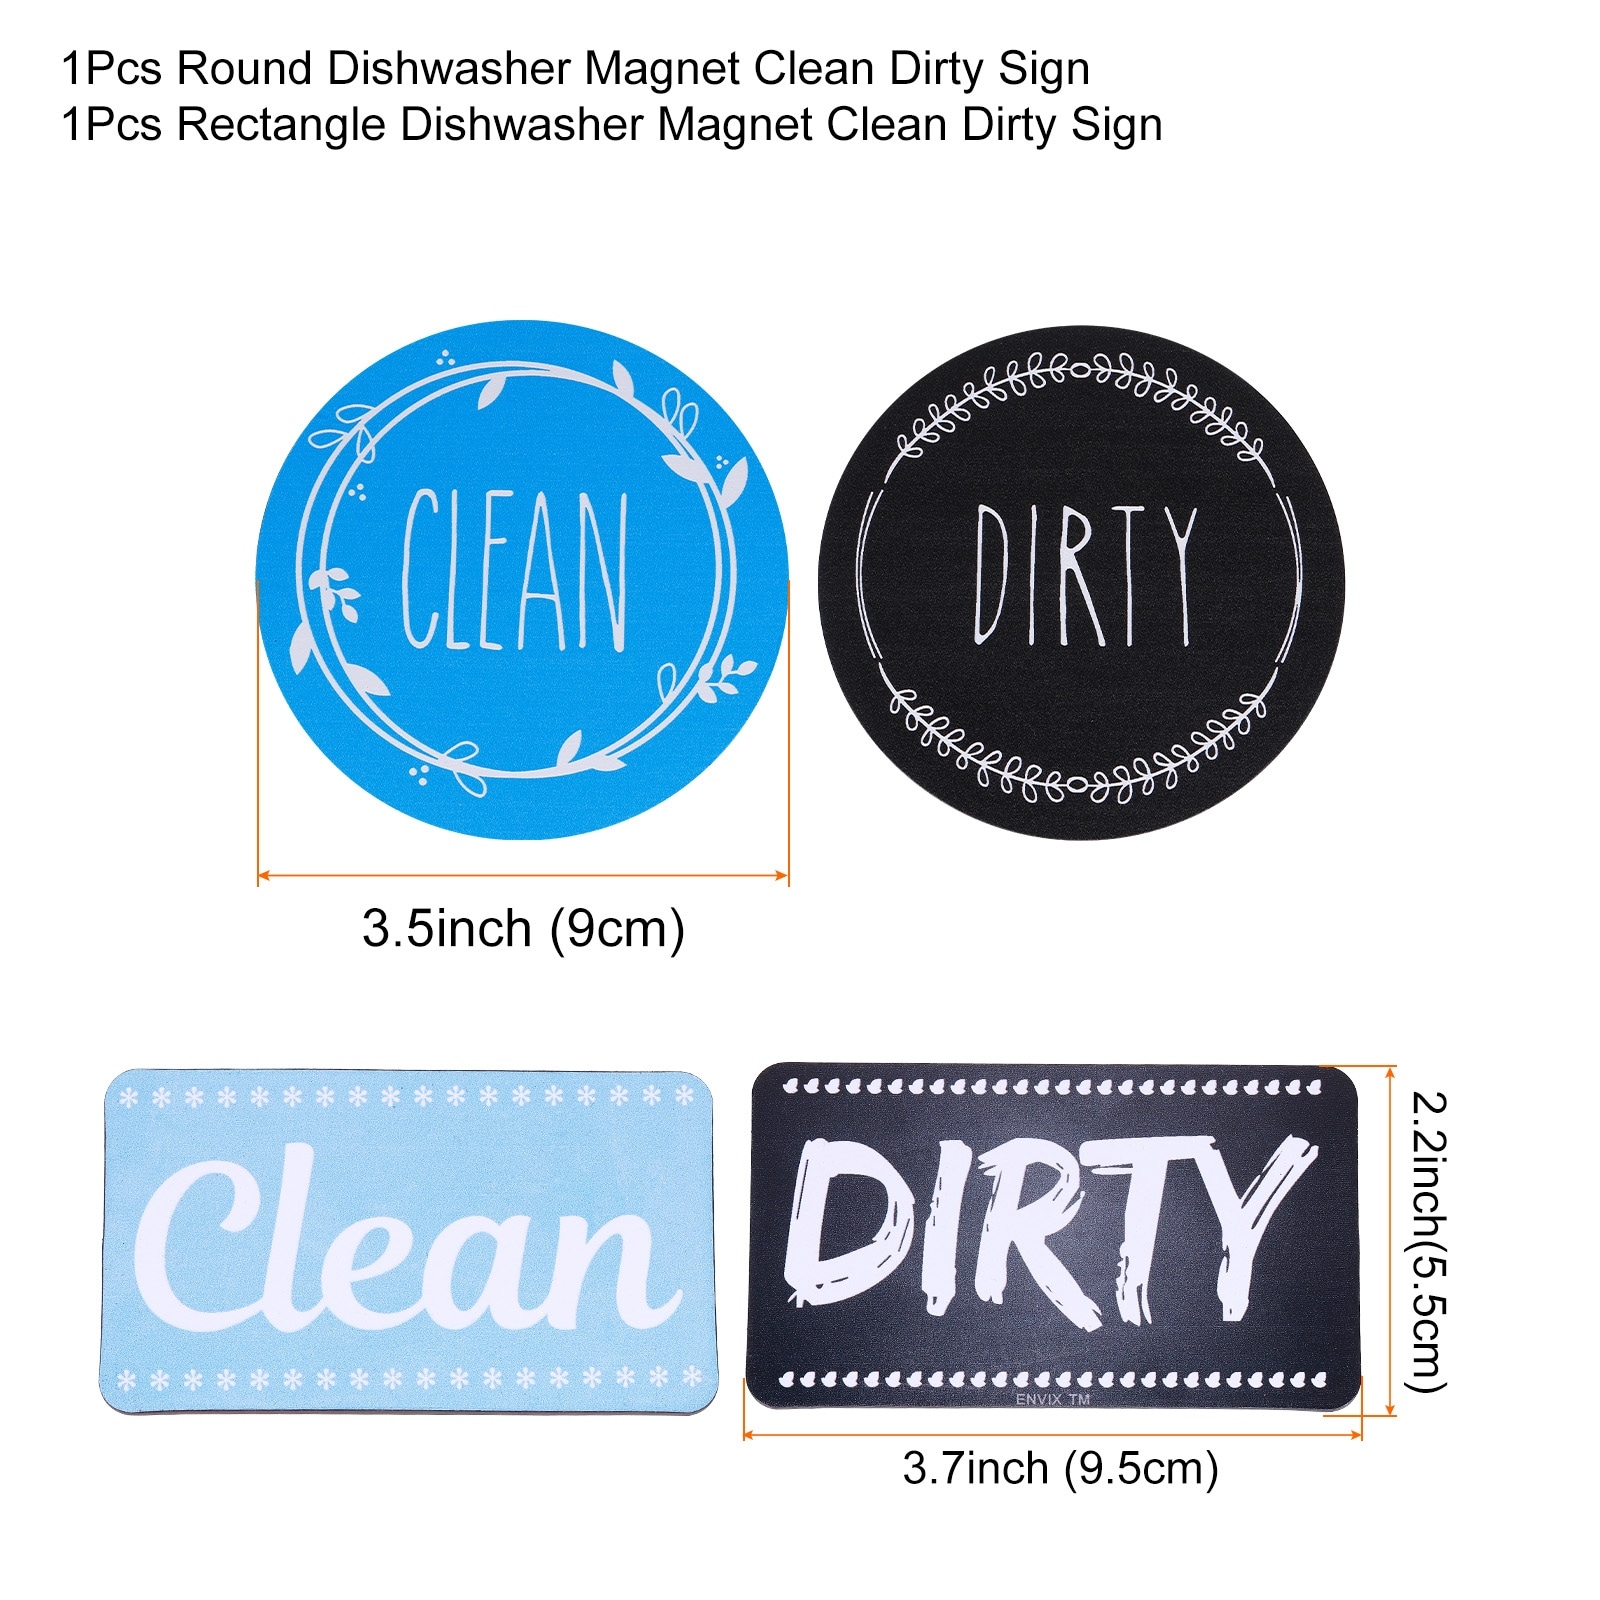 Double Sided Clean or Dirty Dishwasher Magnet Indicator Sign (3.5 x 2  Inches)